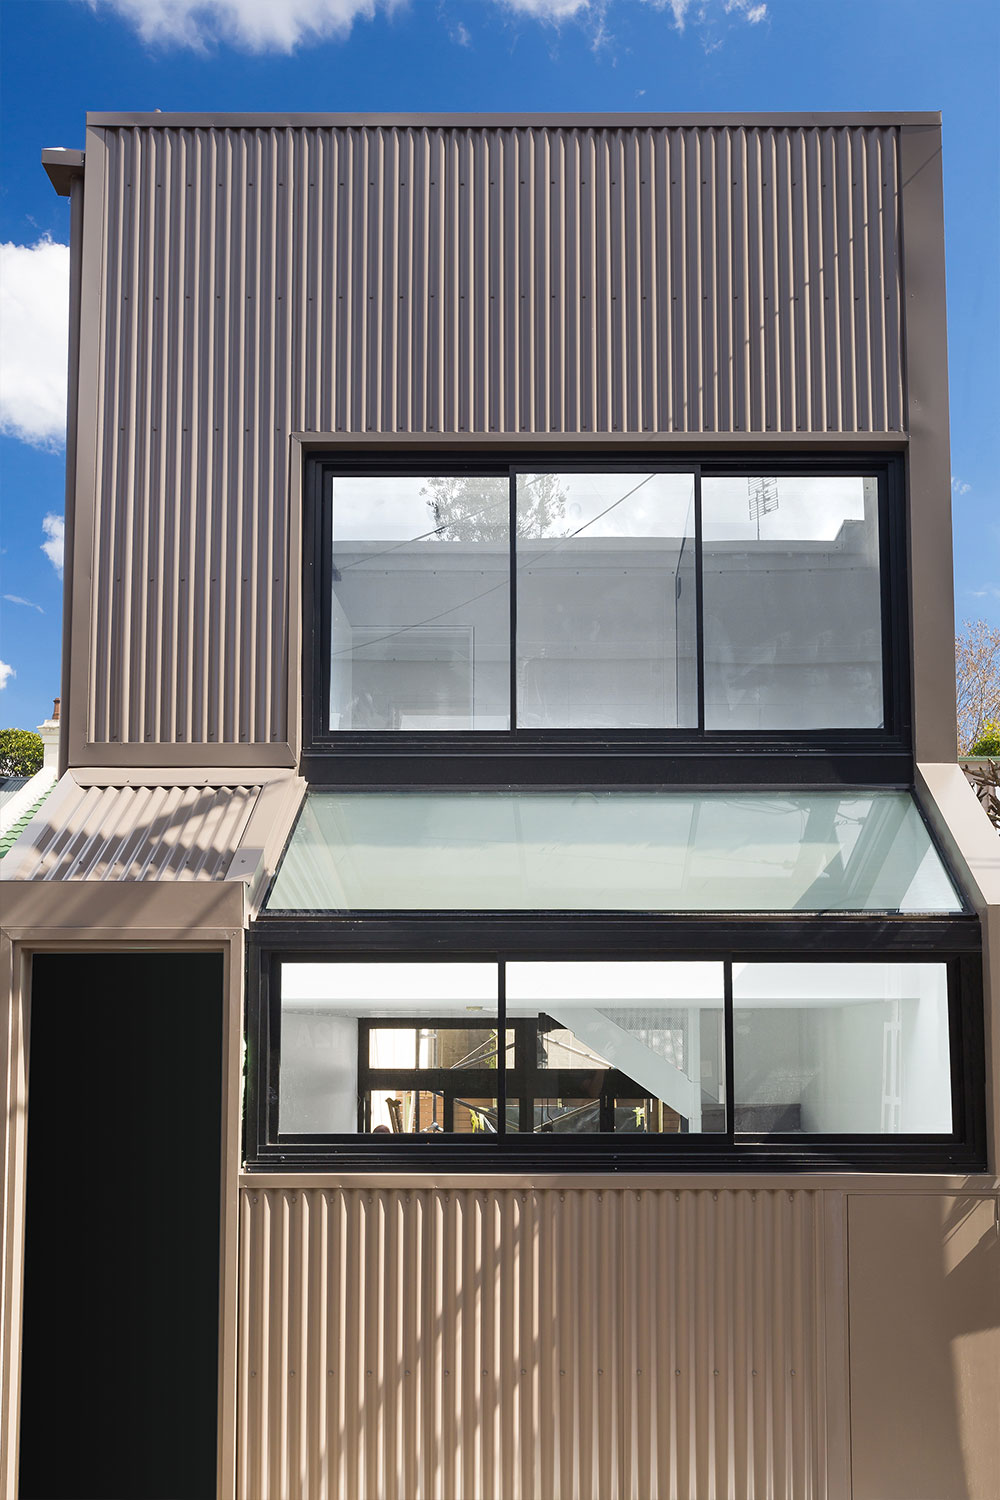 Riley St - Surry hills - Corrugated Roofing Projects